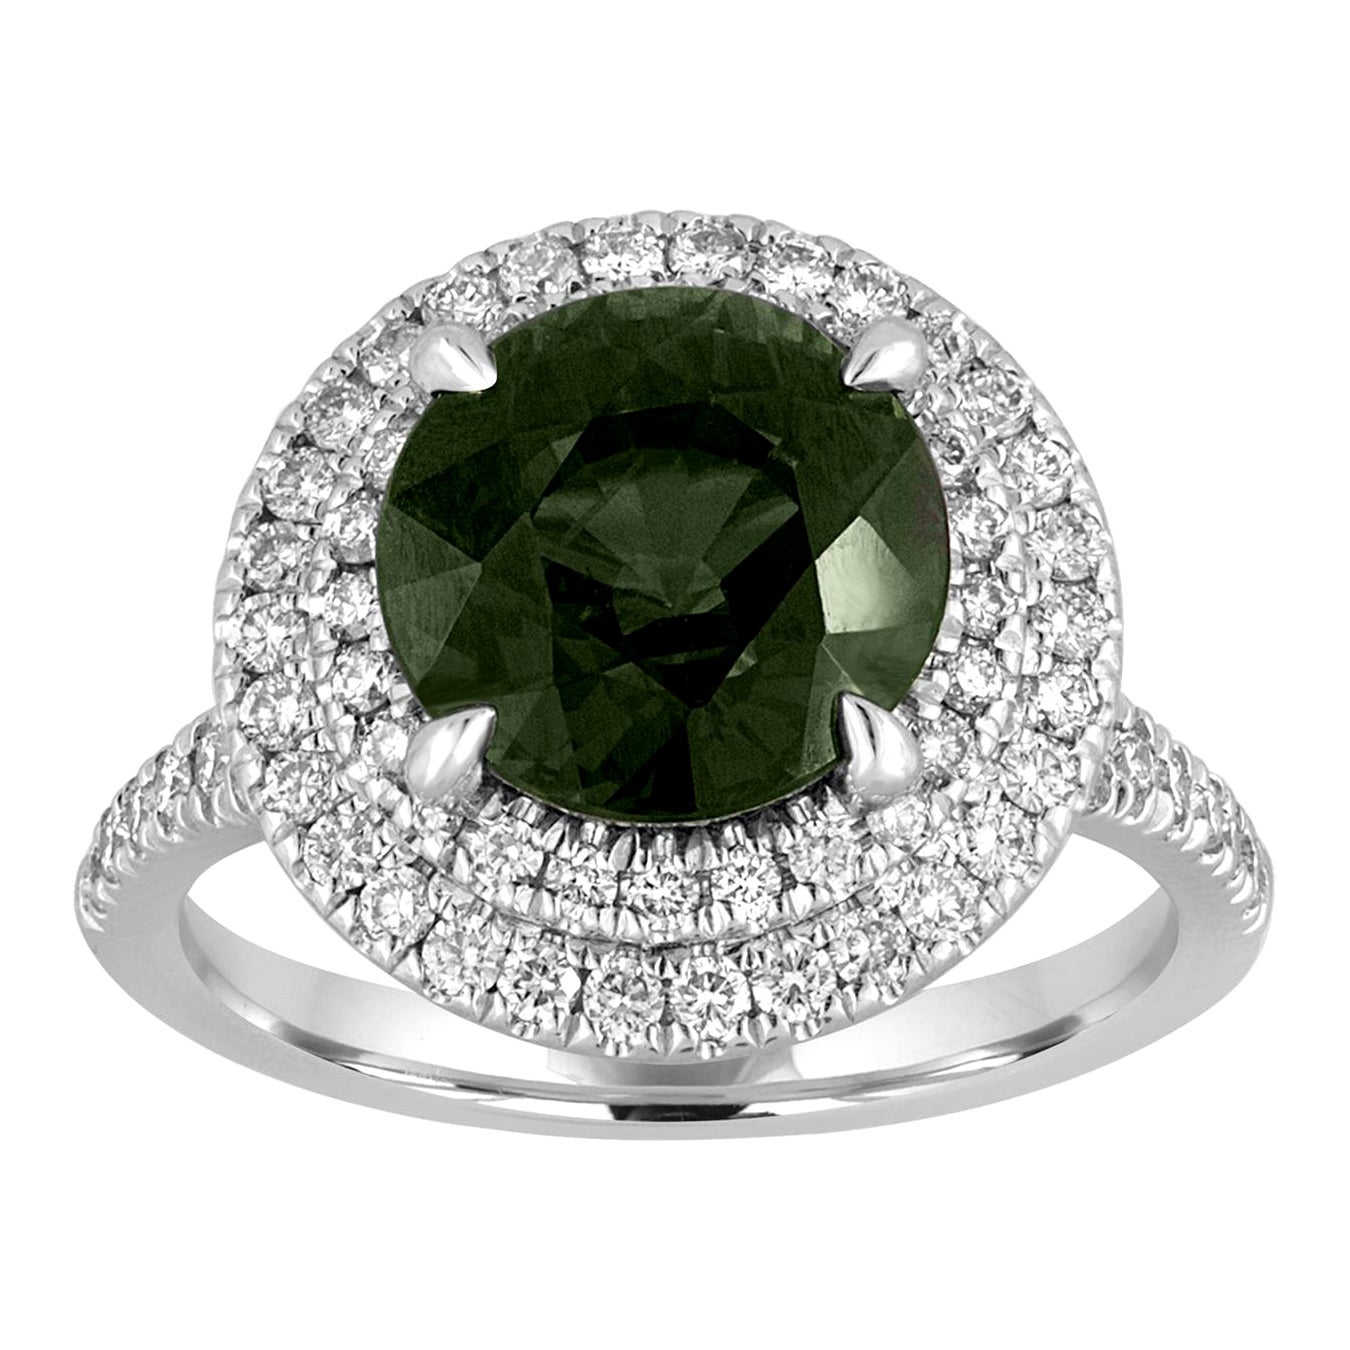 Certified No Heat 5.27 Carat Bluish Green Sapphire Double Halo Diamond Gold Ring For Sale